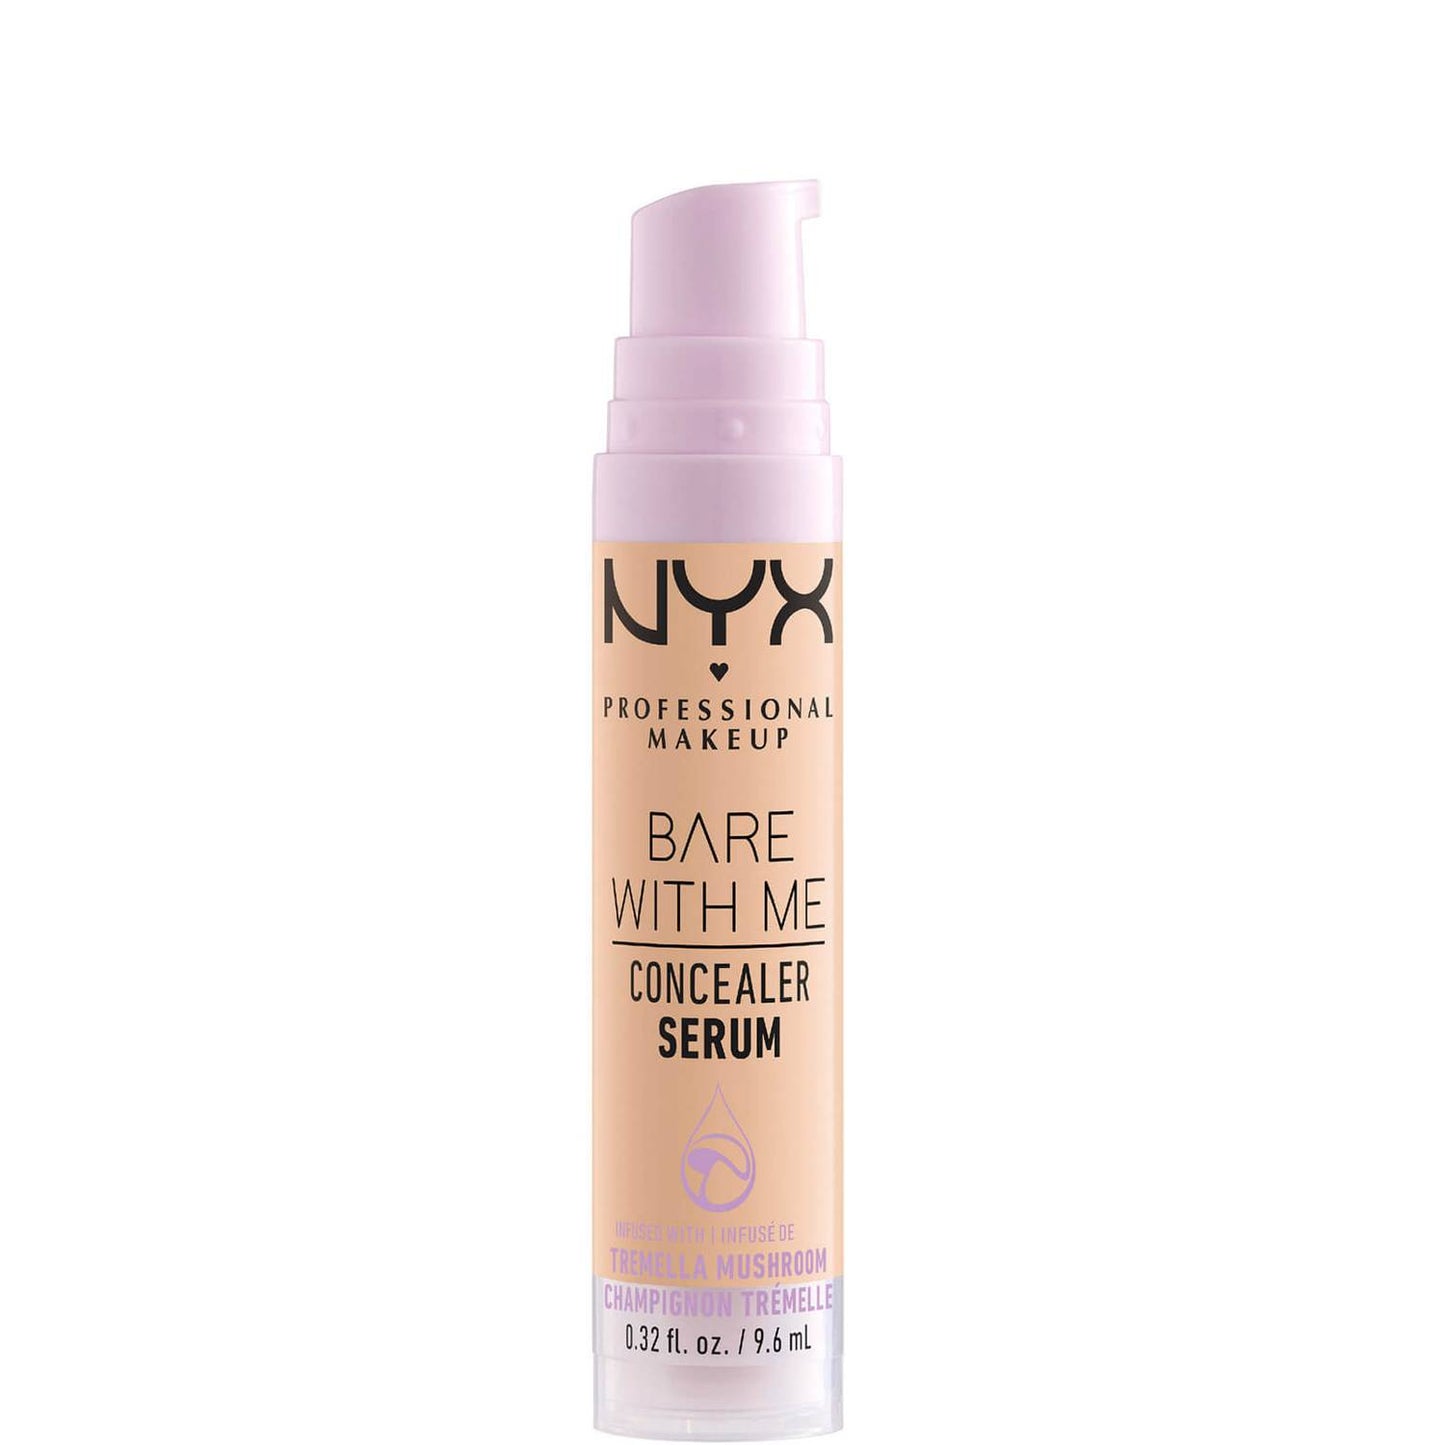 NYX PROFESSIONAL MAKEUP | BARE WITH ME CONCEALER SERUM